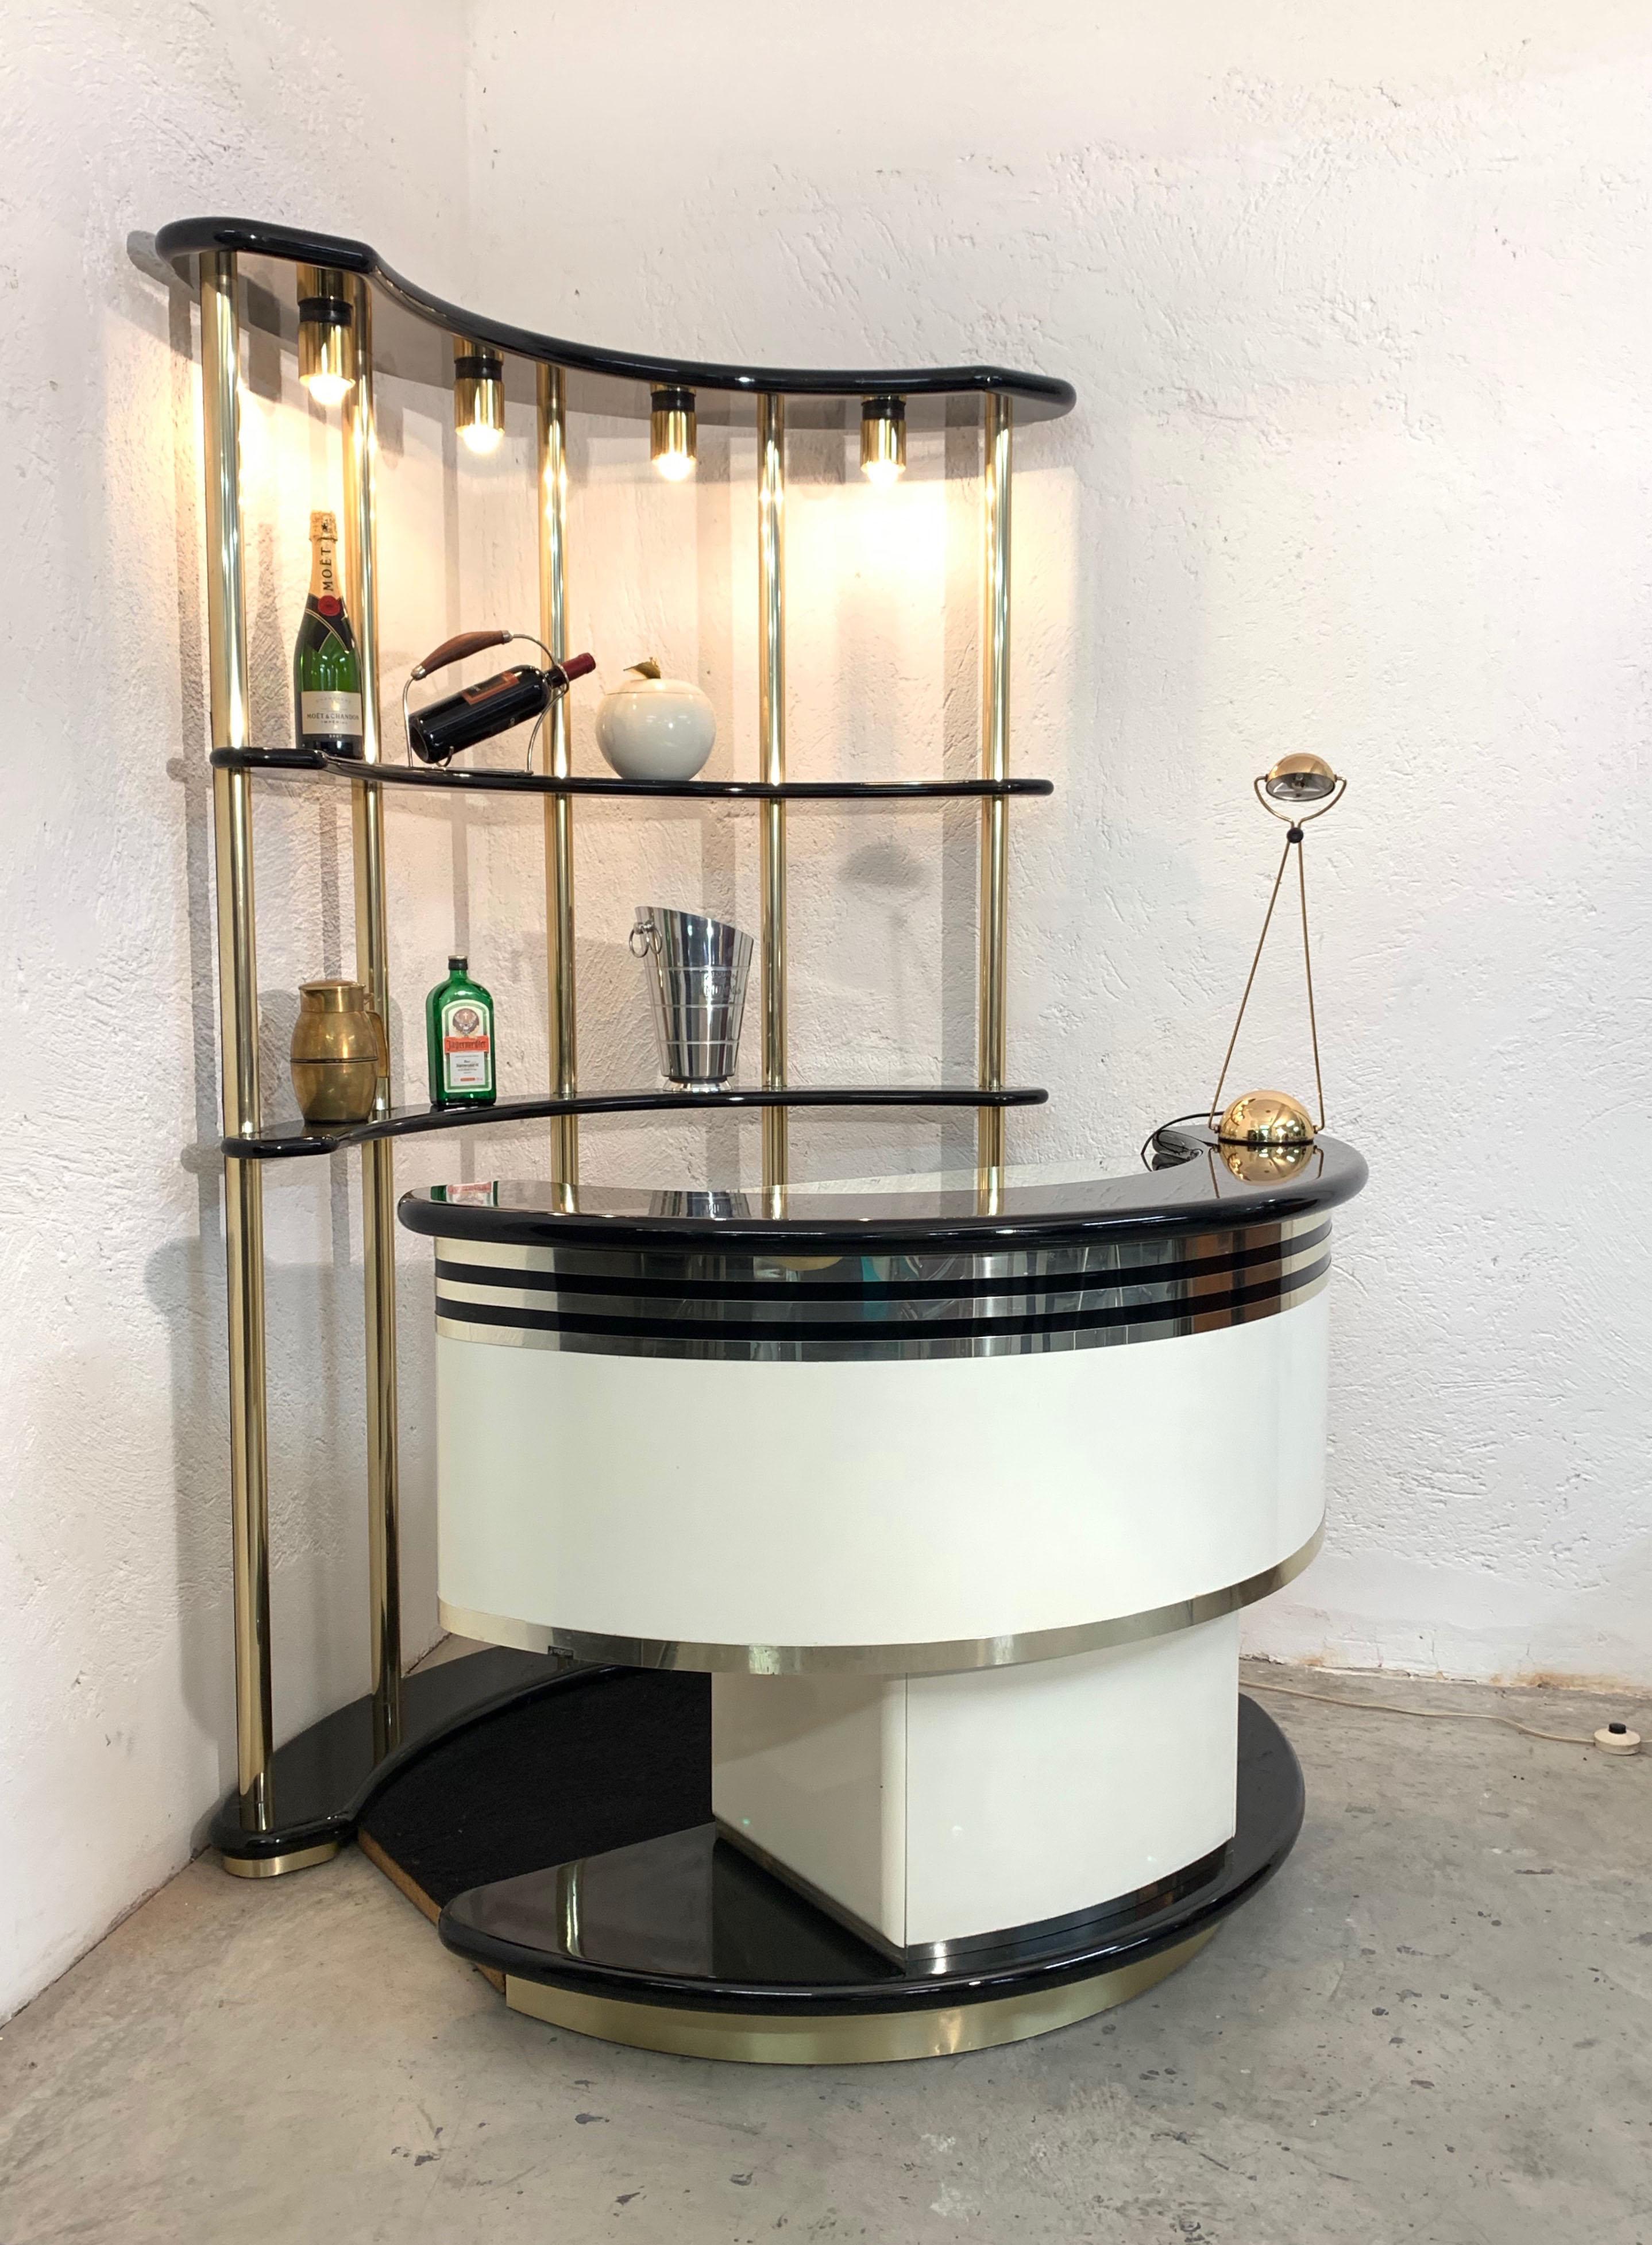 Stilglass Donati Guzzini Italian dry bar with illuminated storage, 1970s

This is a stunning Italian dry bar produced during the 1970s by Stilglass Donati Guzzini and it it made of two pieces:
- the white and black wood dry bar has a small